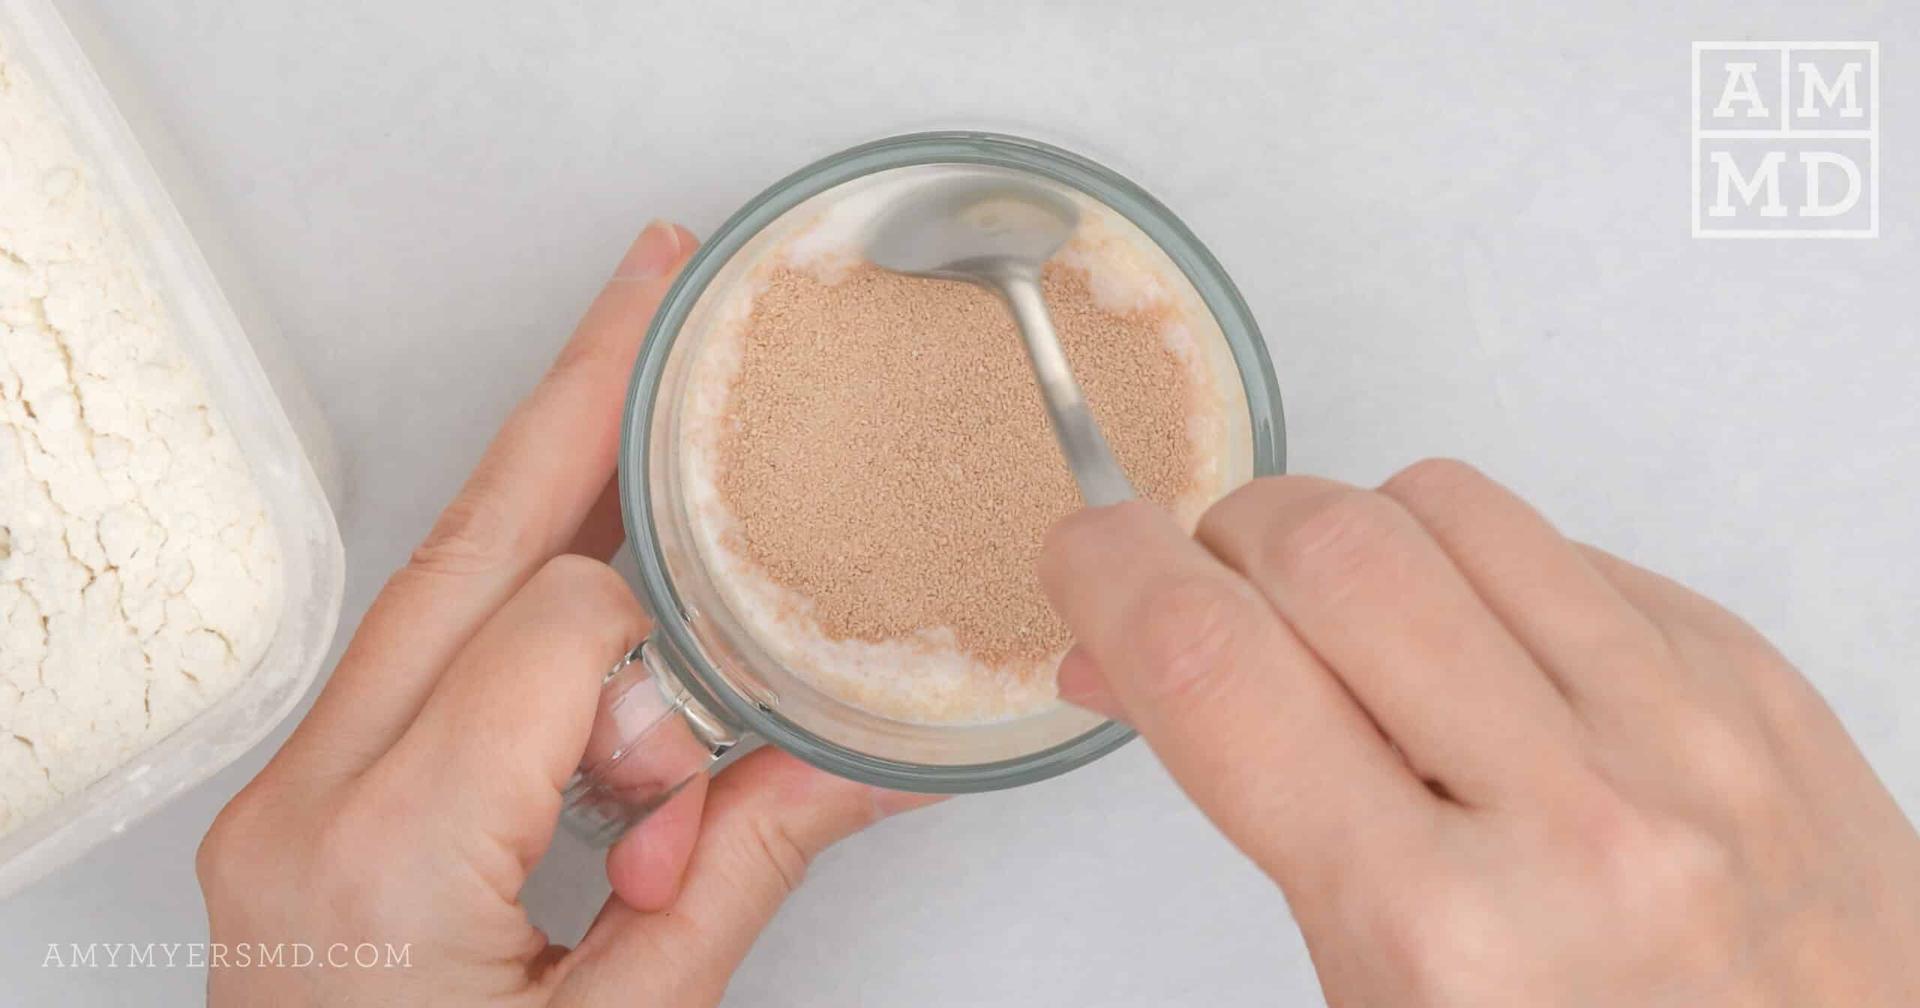 How To Choose a Collagen Powder